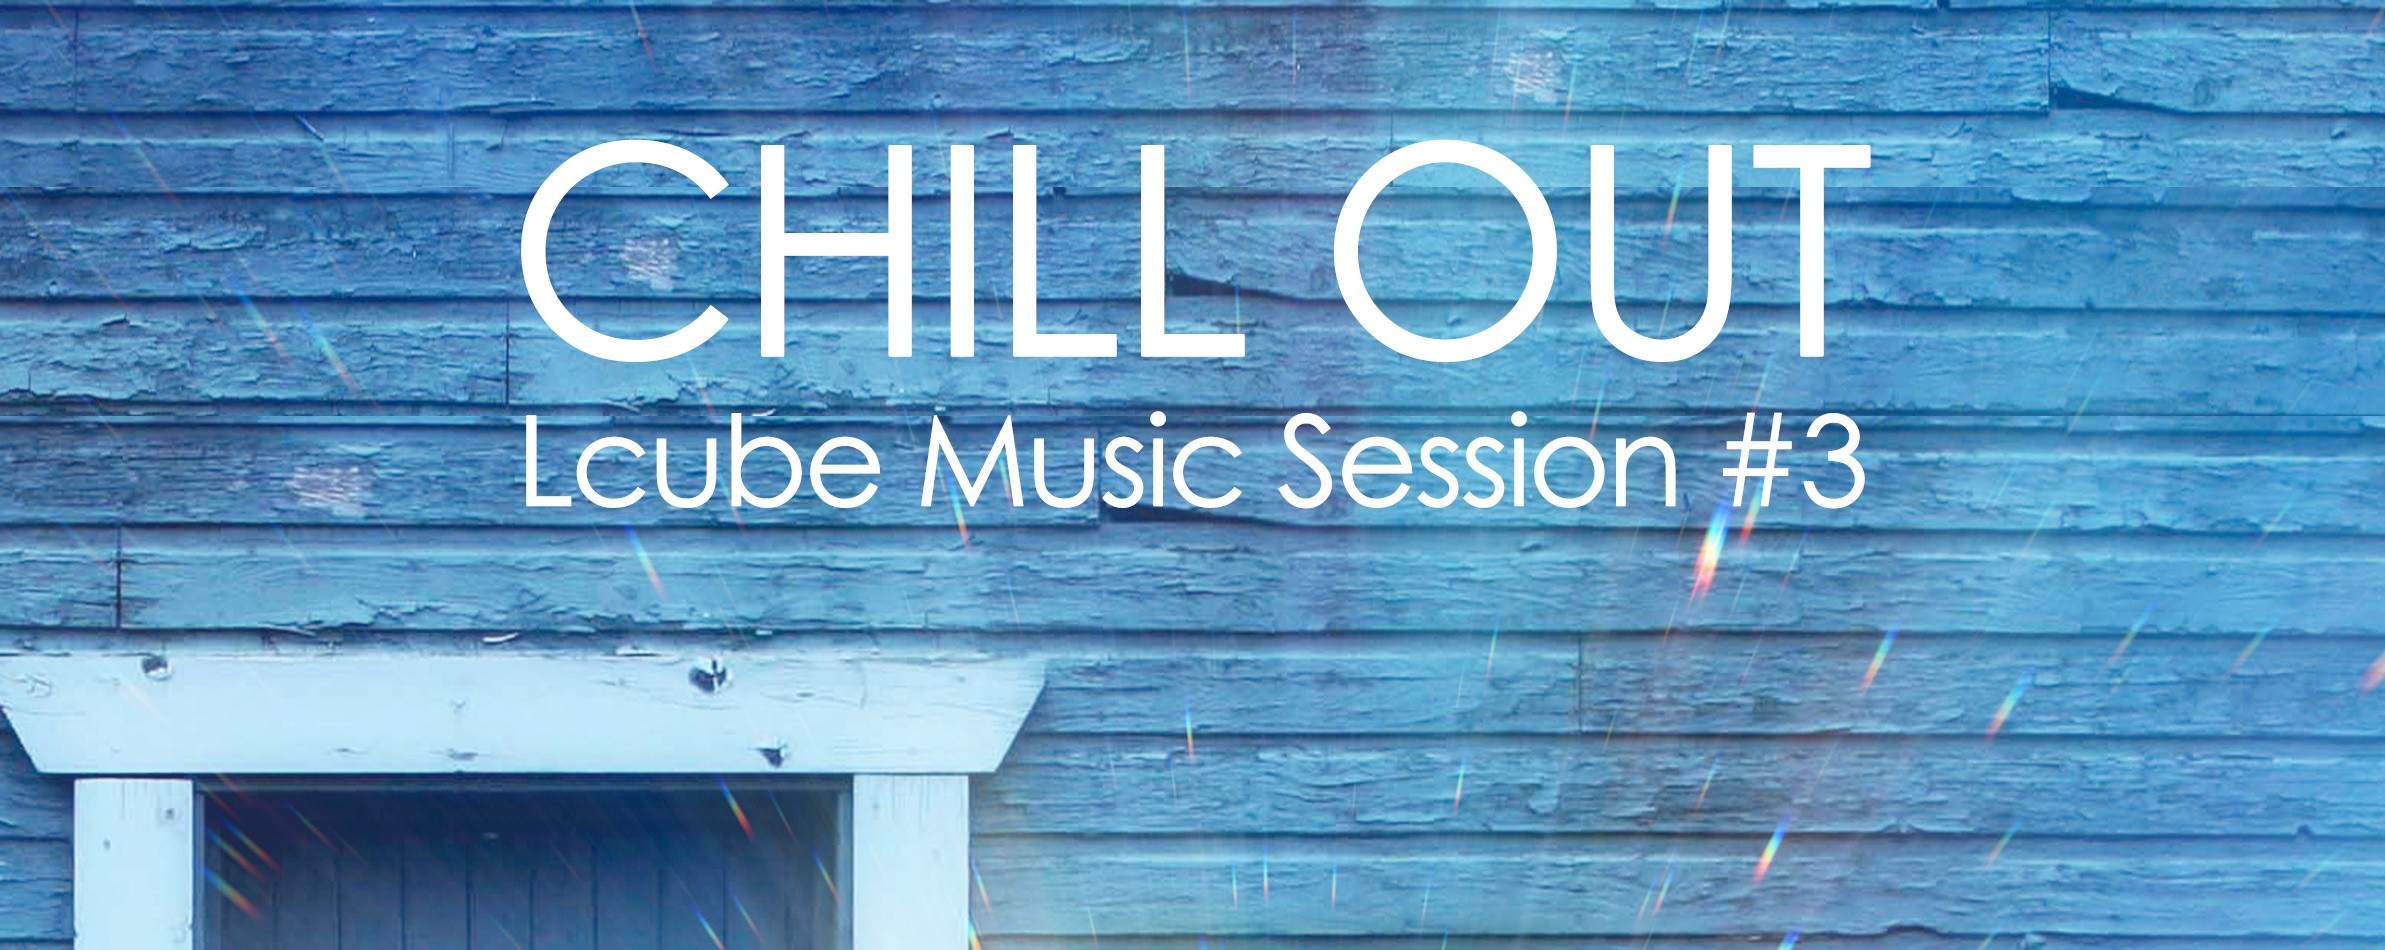 Lcube Music Session #4 Chill Out